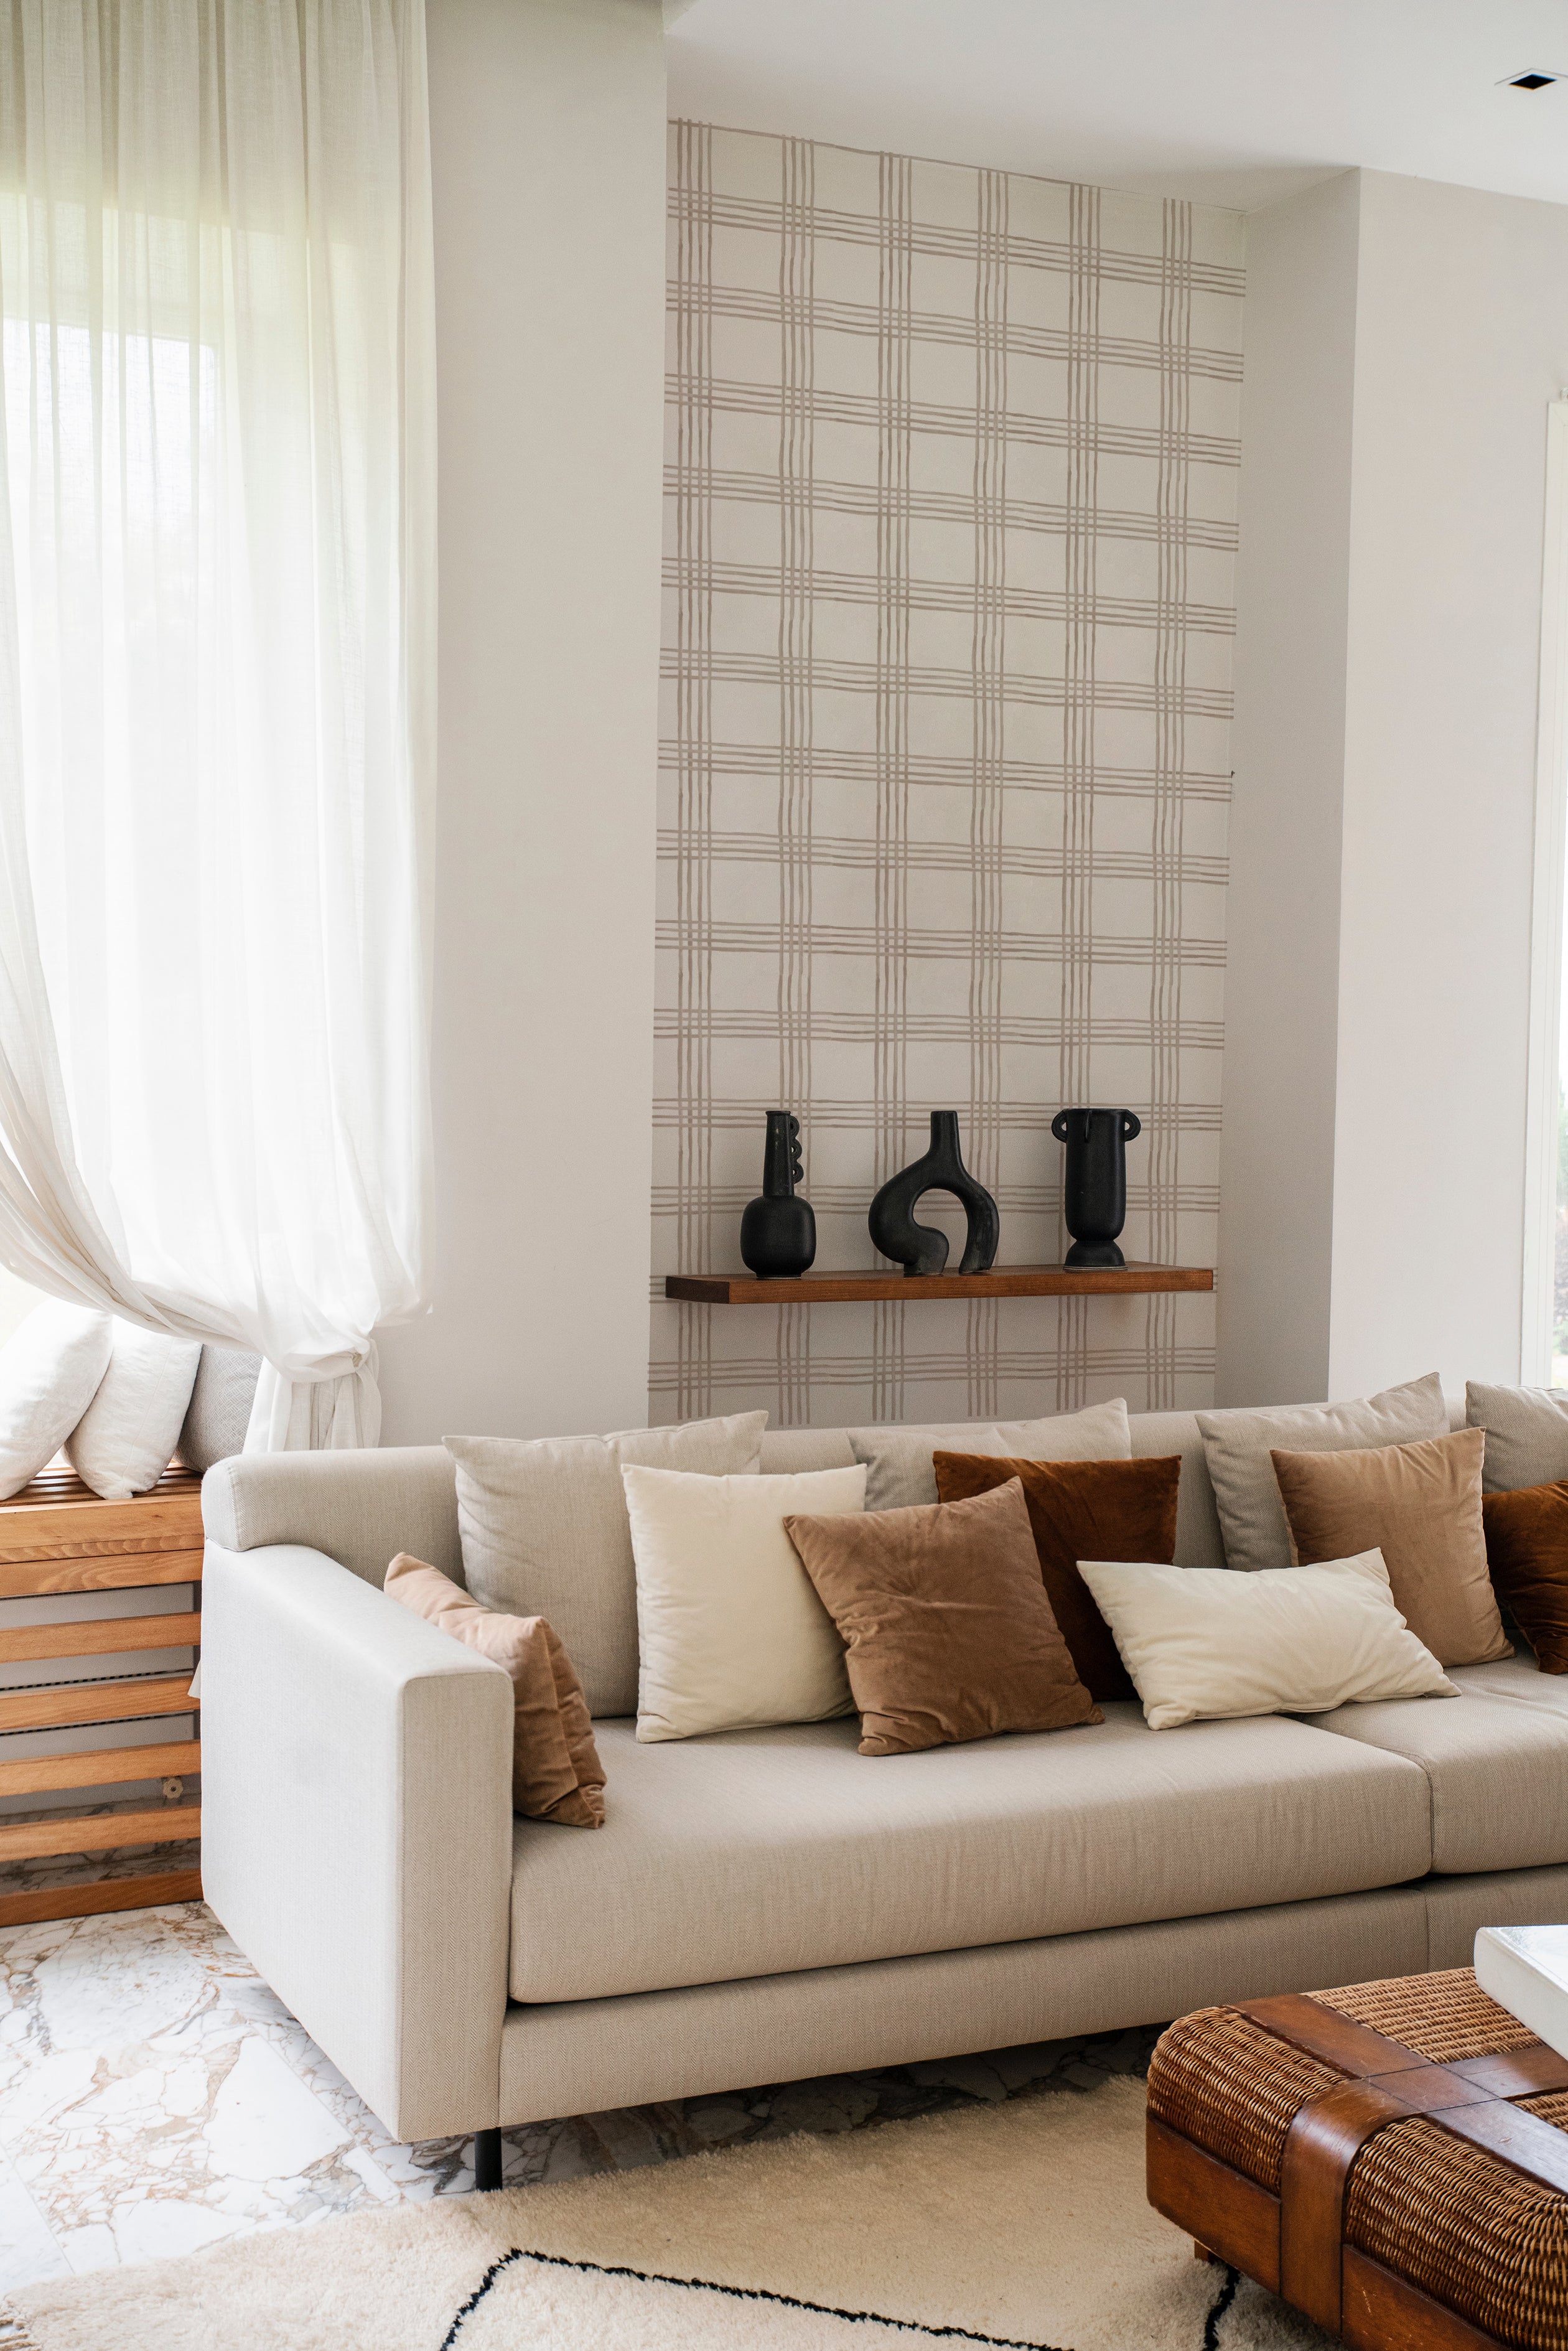 An elegant living room scene featuring the Big Boho Wallpaper - 123 on one wall. The wallpaper’s grid pattern in beige on a white background complements a cozy sofa filled with pillows in earthy tones and a wooden shelf displaying unique black vases, enhancing the room's modern aesthetic